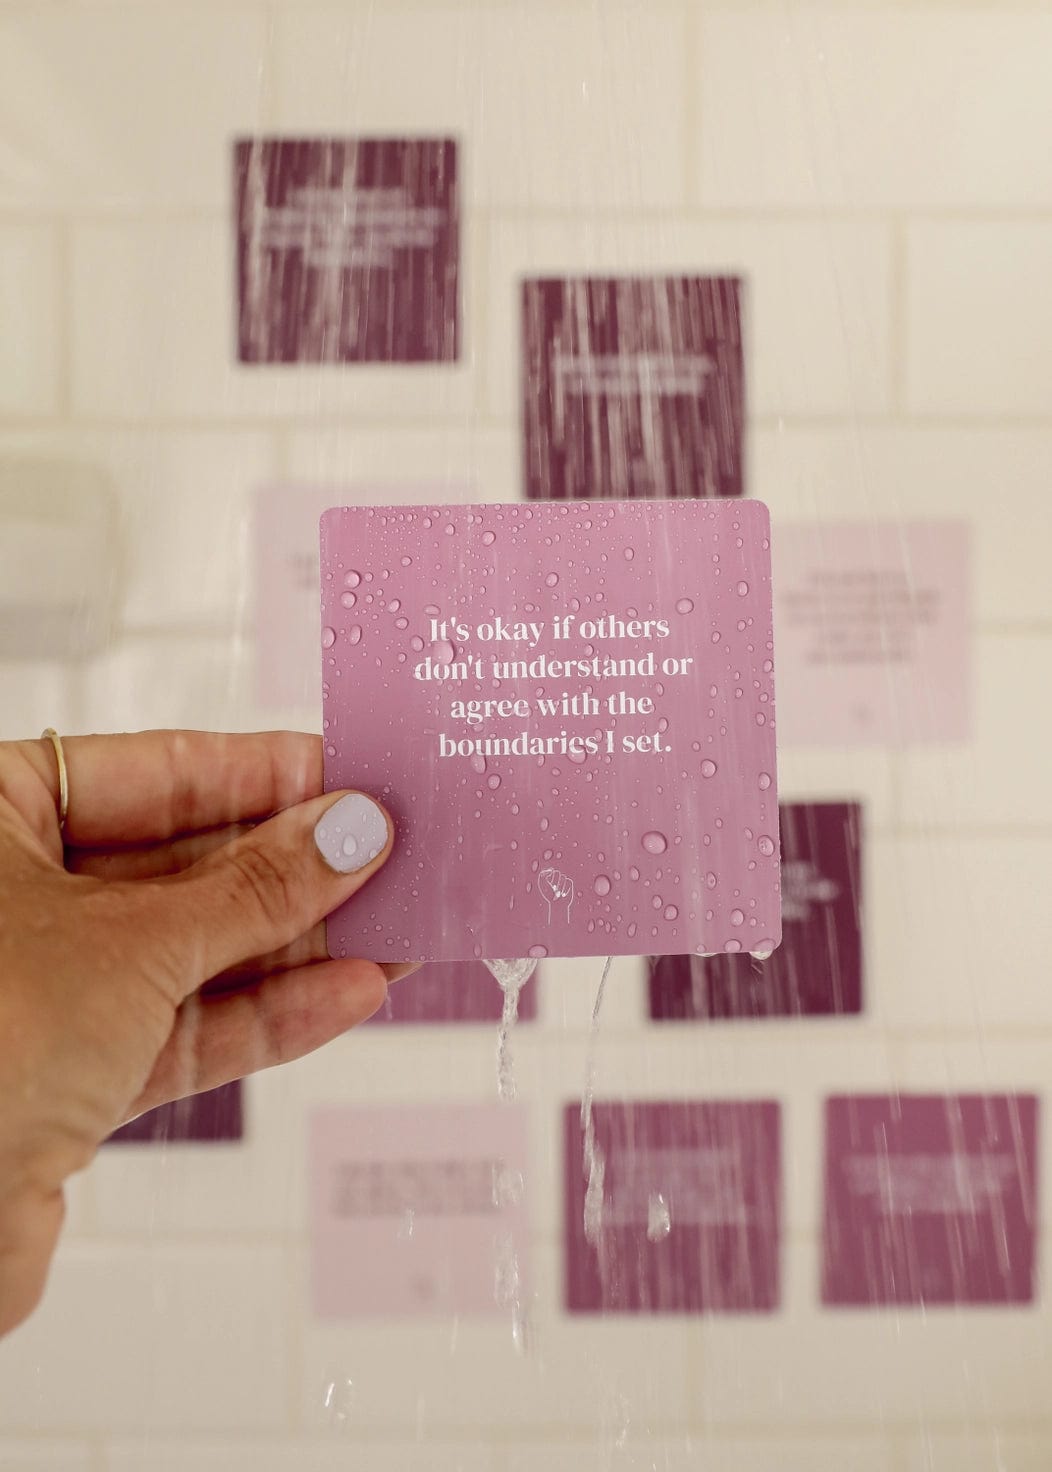 SHOWER AFFIRMATION CARDS - BOUNDARIES Revive In Style Vintage Furniture Painted Refinished Redesign Beautiful One of a Kind Artistic Antique Unique Home Decor Interior Design French Country Shabby Chic Cottage Farmhouse Grandmillenial Coastal Chalk Paint Metallic Glam Eclectic Quality Dovetailed Rustic Furniture Painter Pinterest Bedroom Living Room Entryway Kitchen Home Trends House Styles Decorating ideas